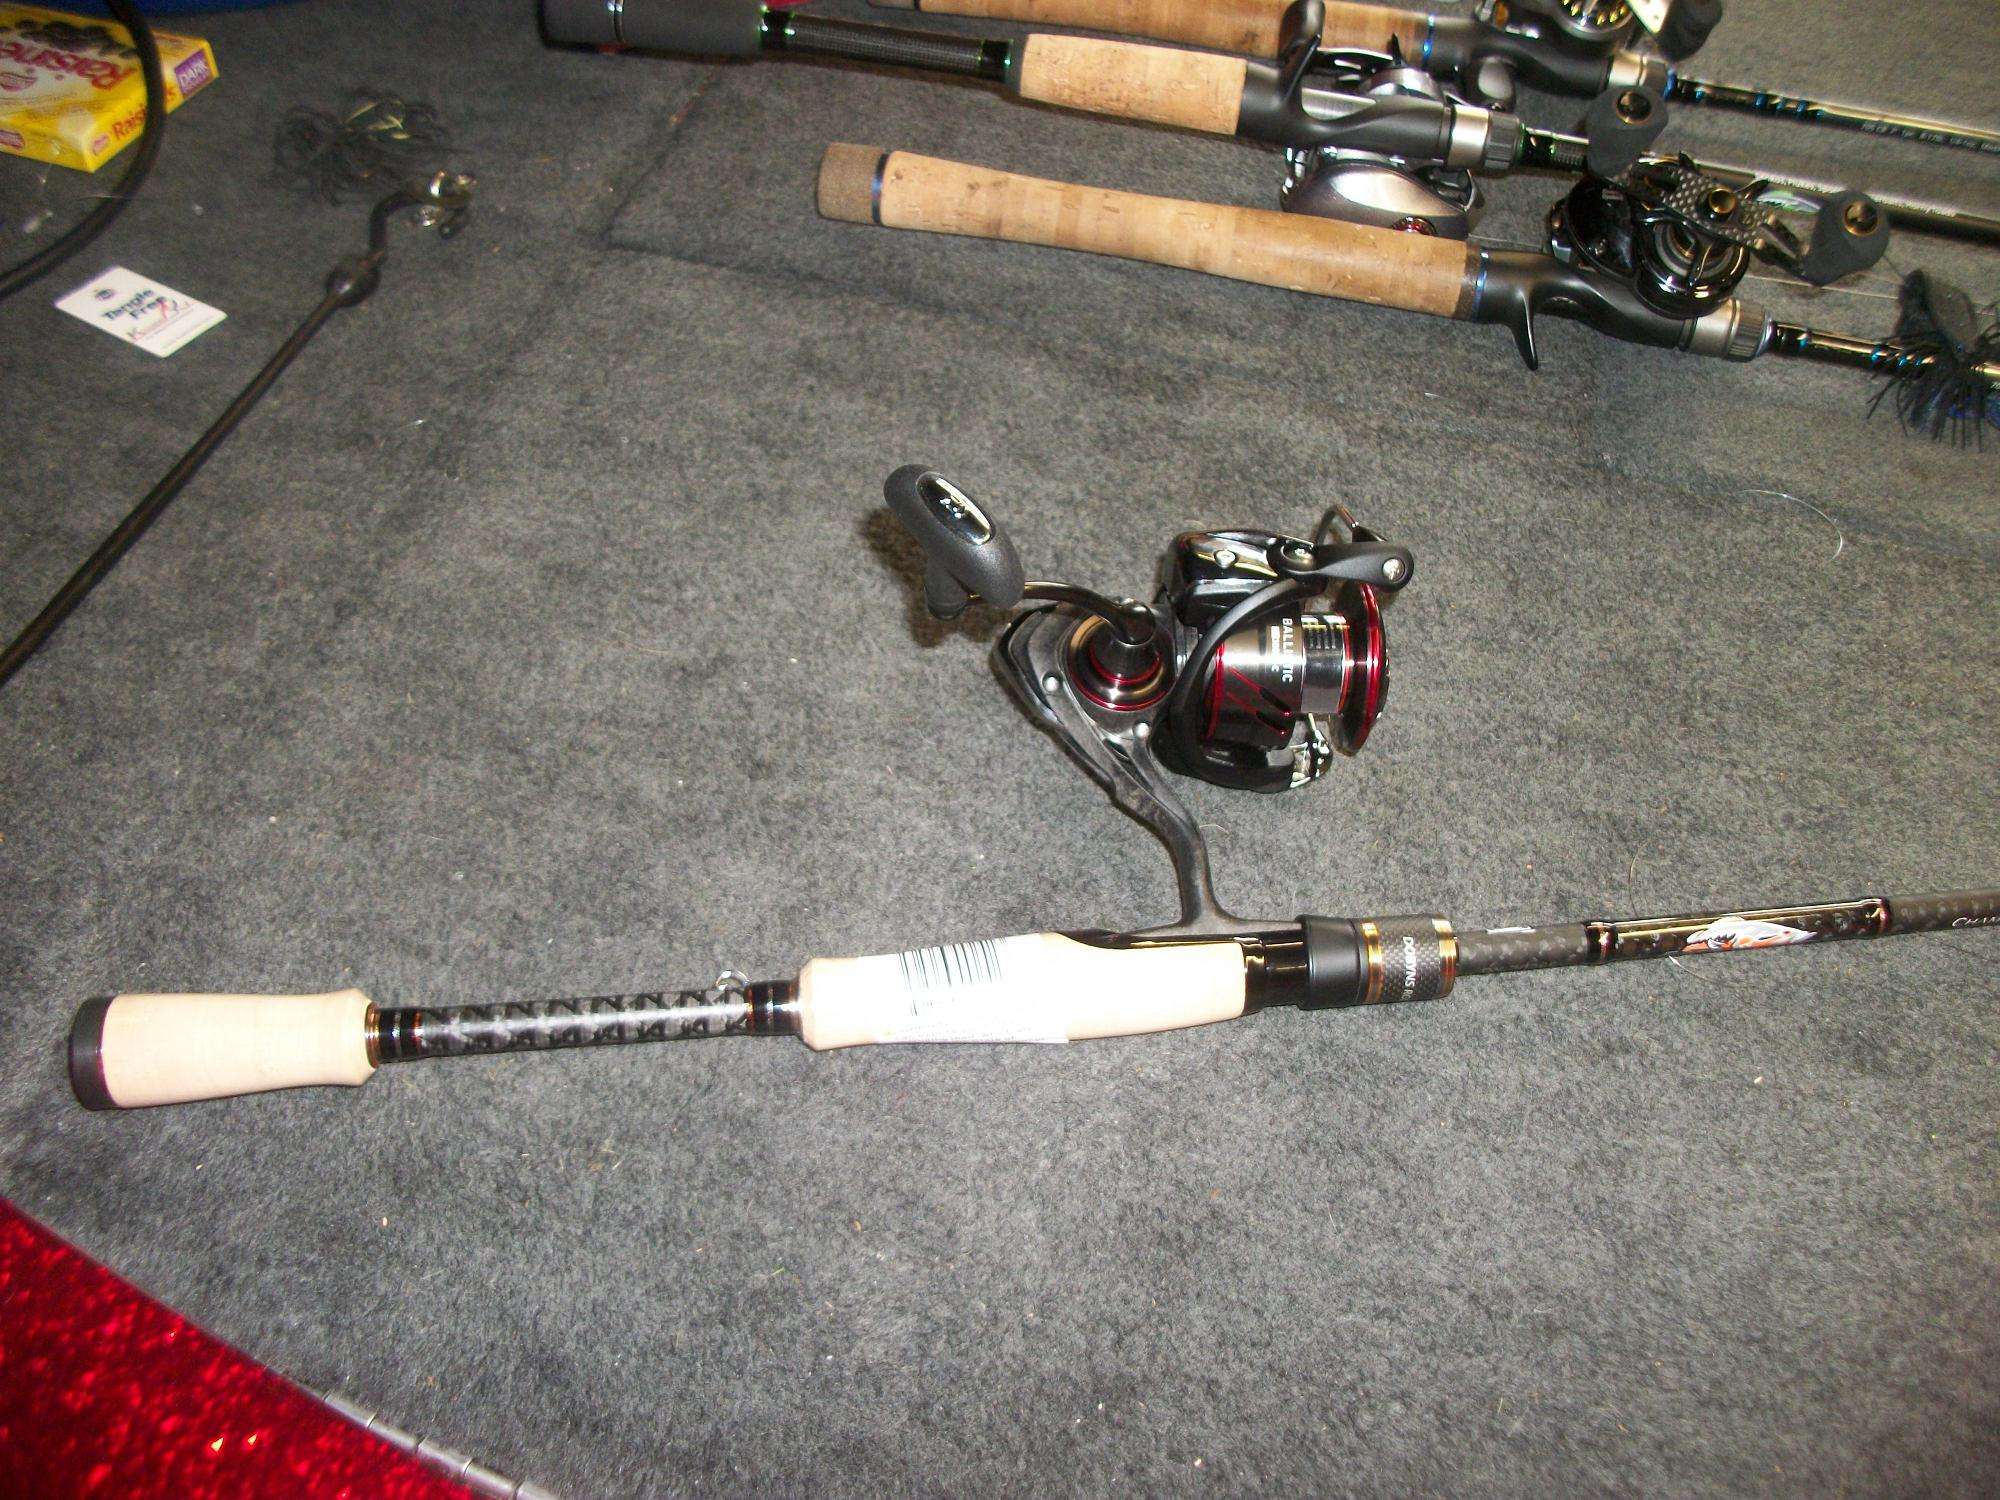 Ultimate senko rod - Fishing Rods, Reels, Line, and Knots - Bass Fishing  Forums